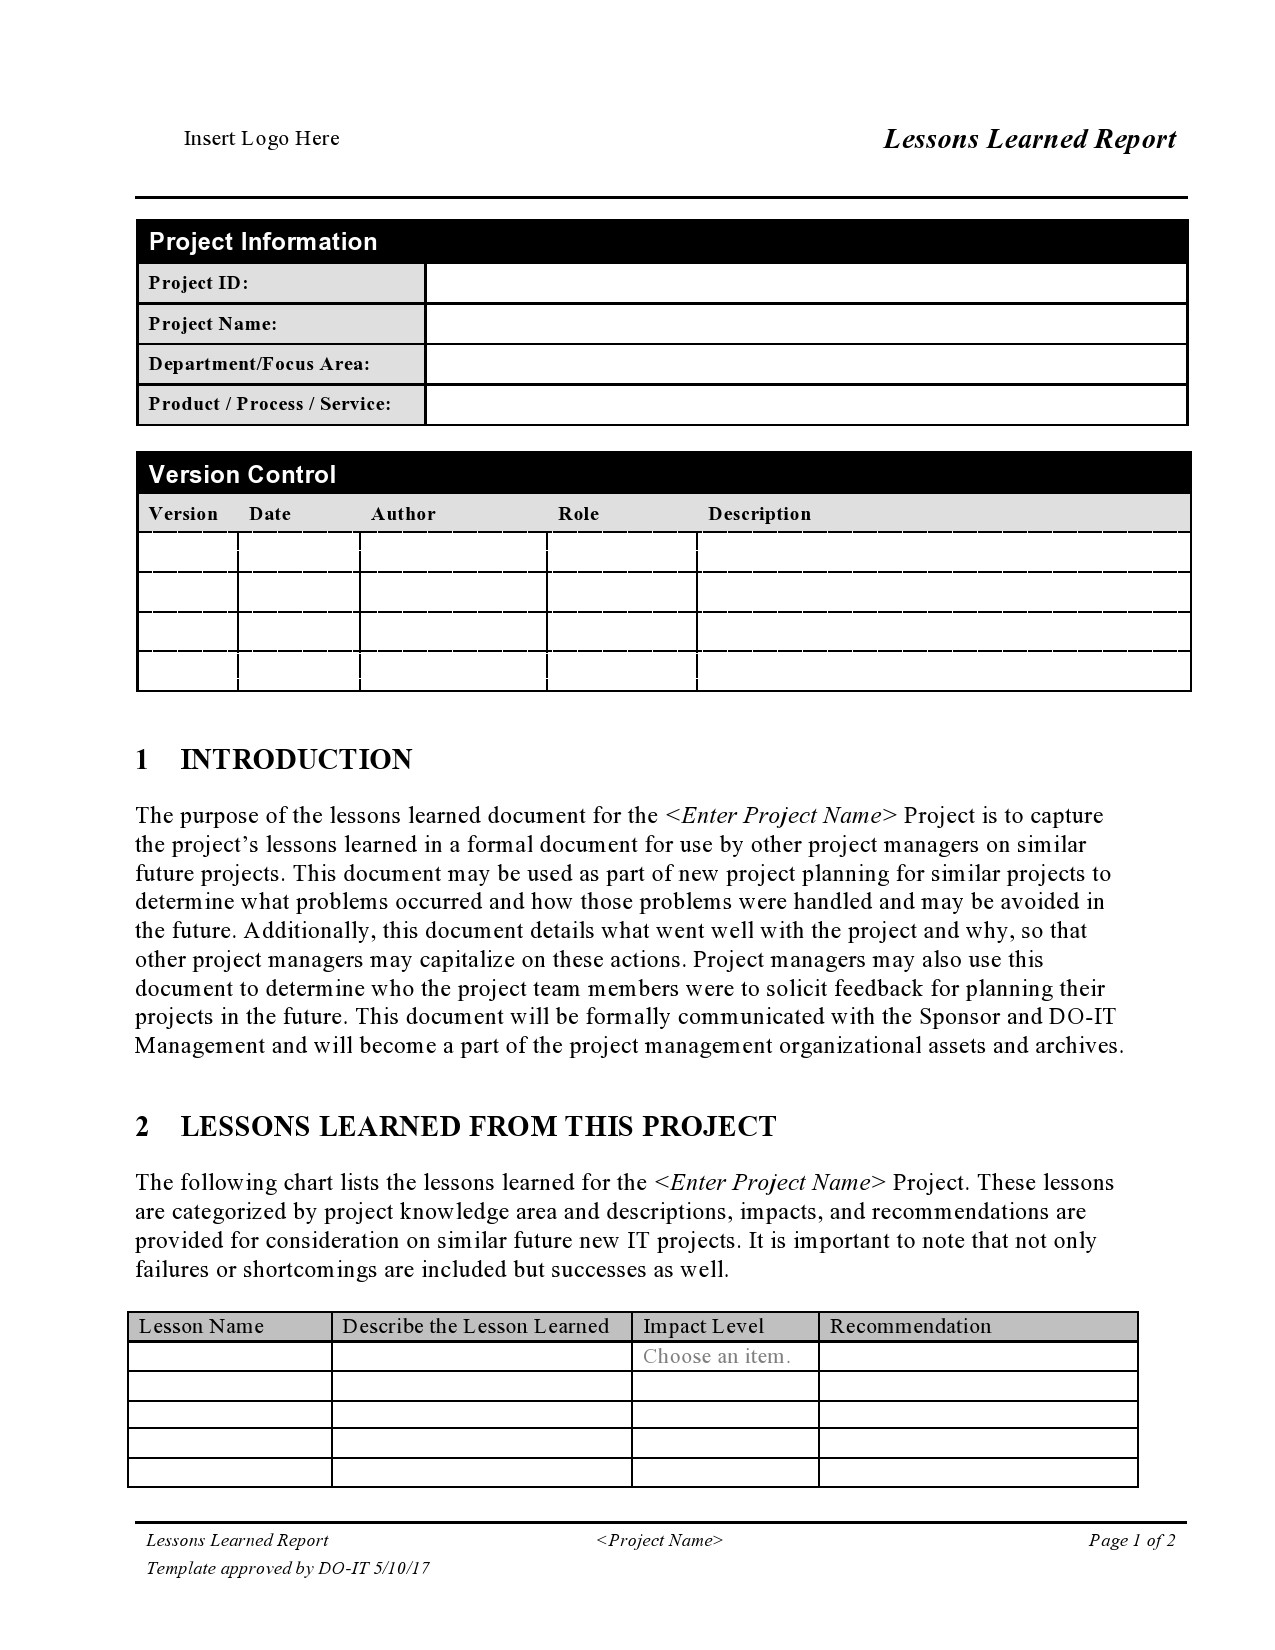 Free lessons learned template 18